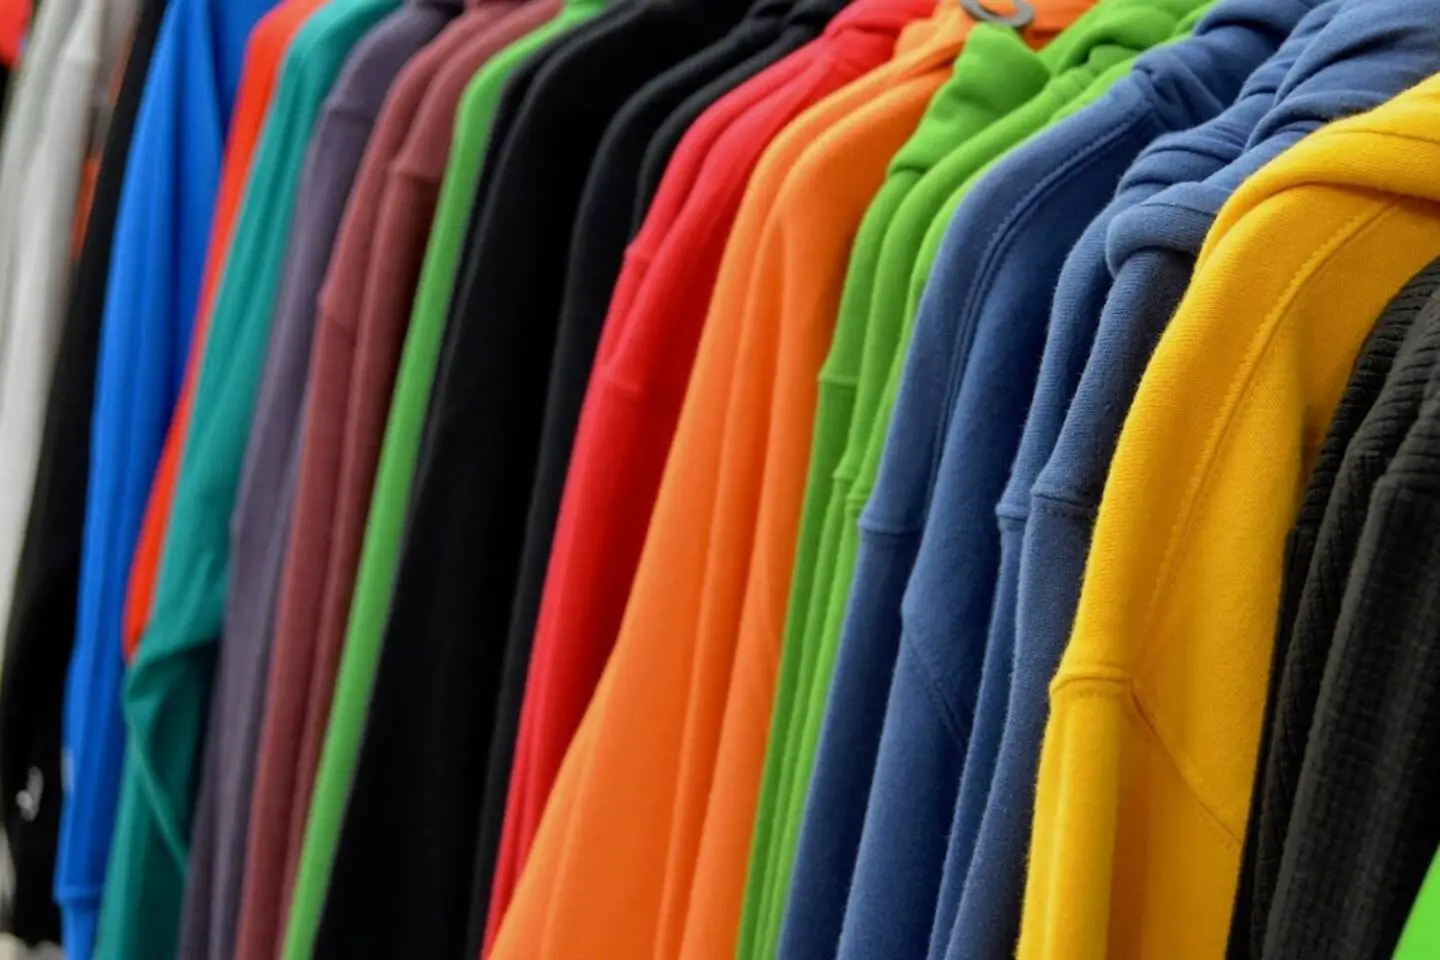 Sweatshirts in an array of rainbow colours, hanging up.